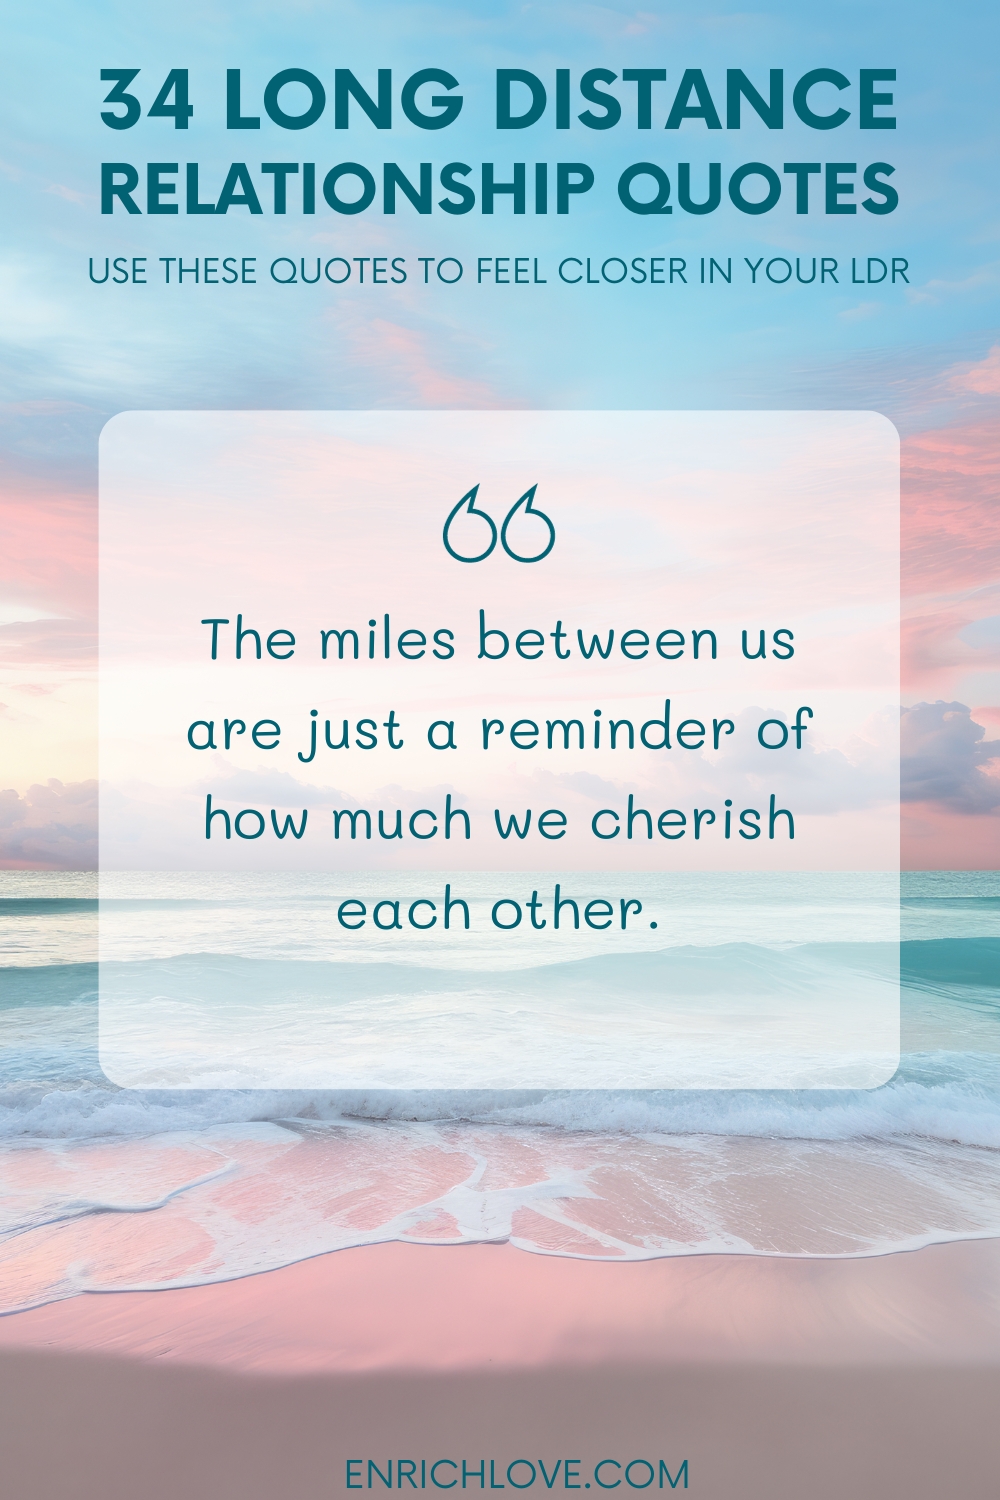 34 Long Distance Relationship Quotes - The miles between us are just a reminder of how much we cherish each other.